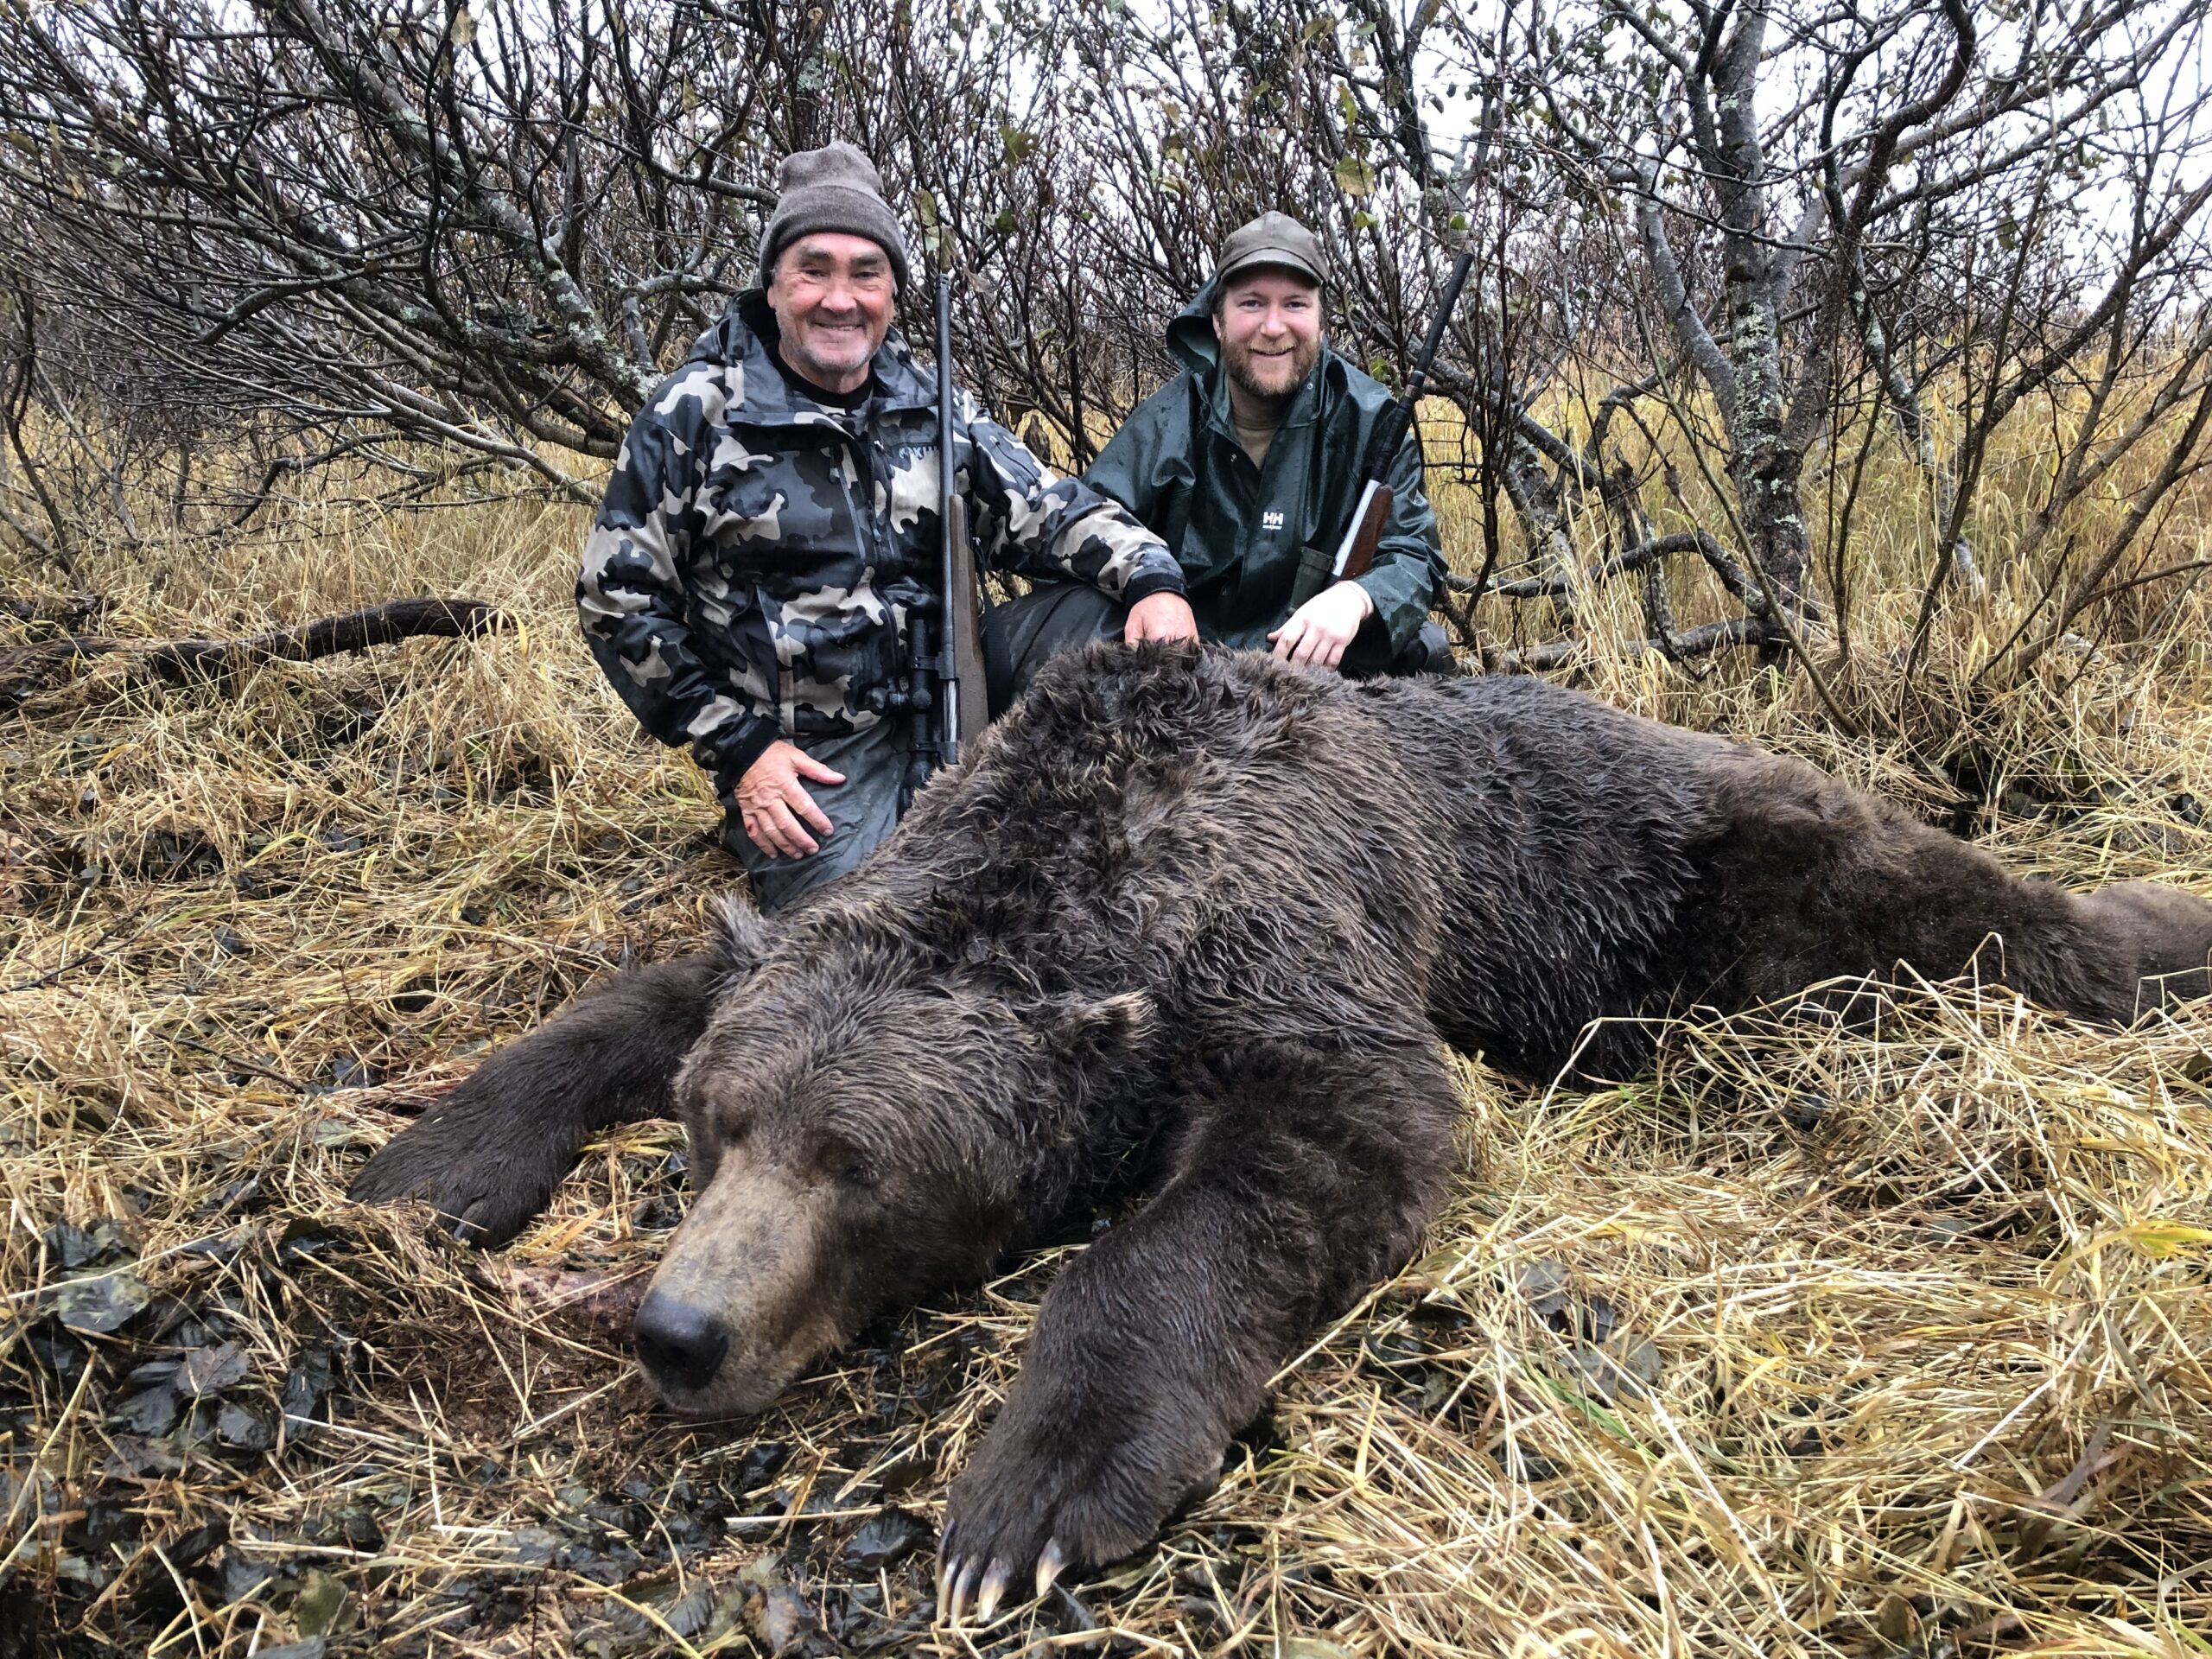 II. Benefits of Obtaining a Bear Hunting License